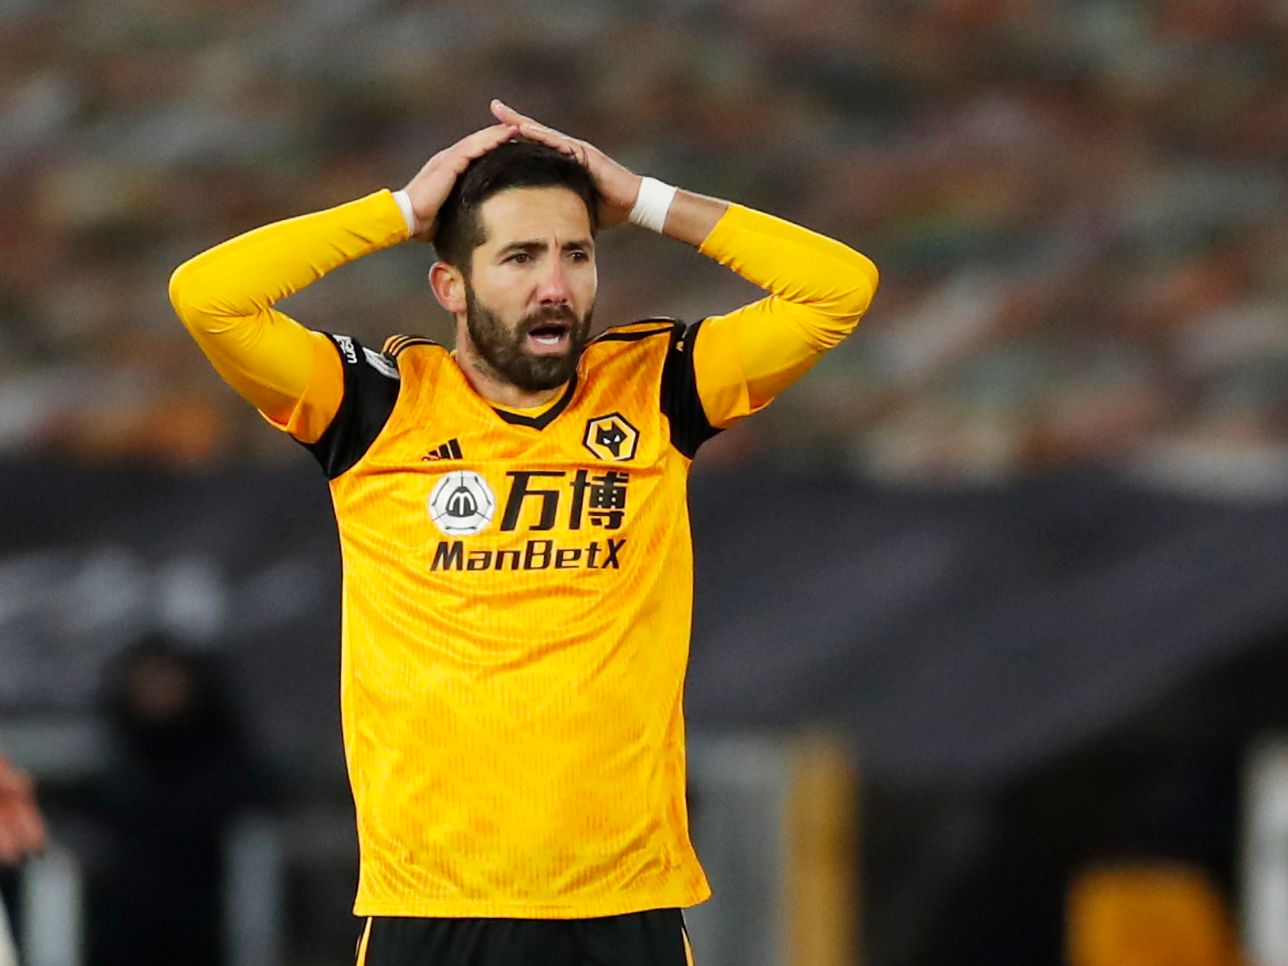 Wolves: Alex Crook makes Joao Moutinho contract claim -Follow up